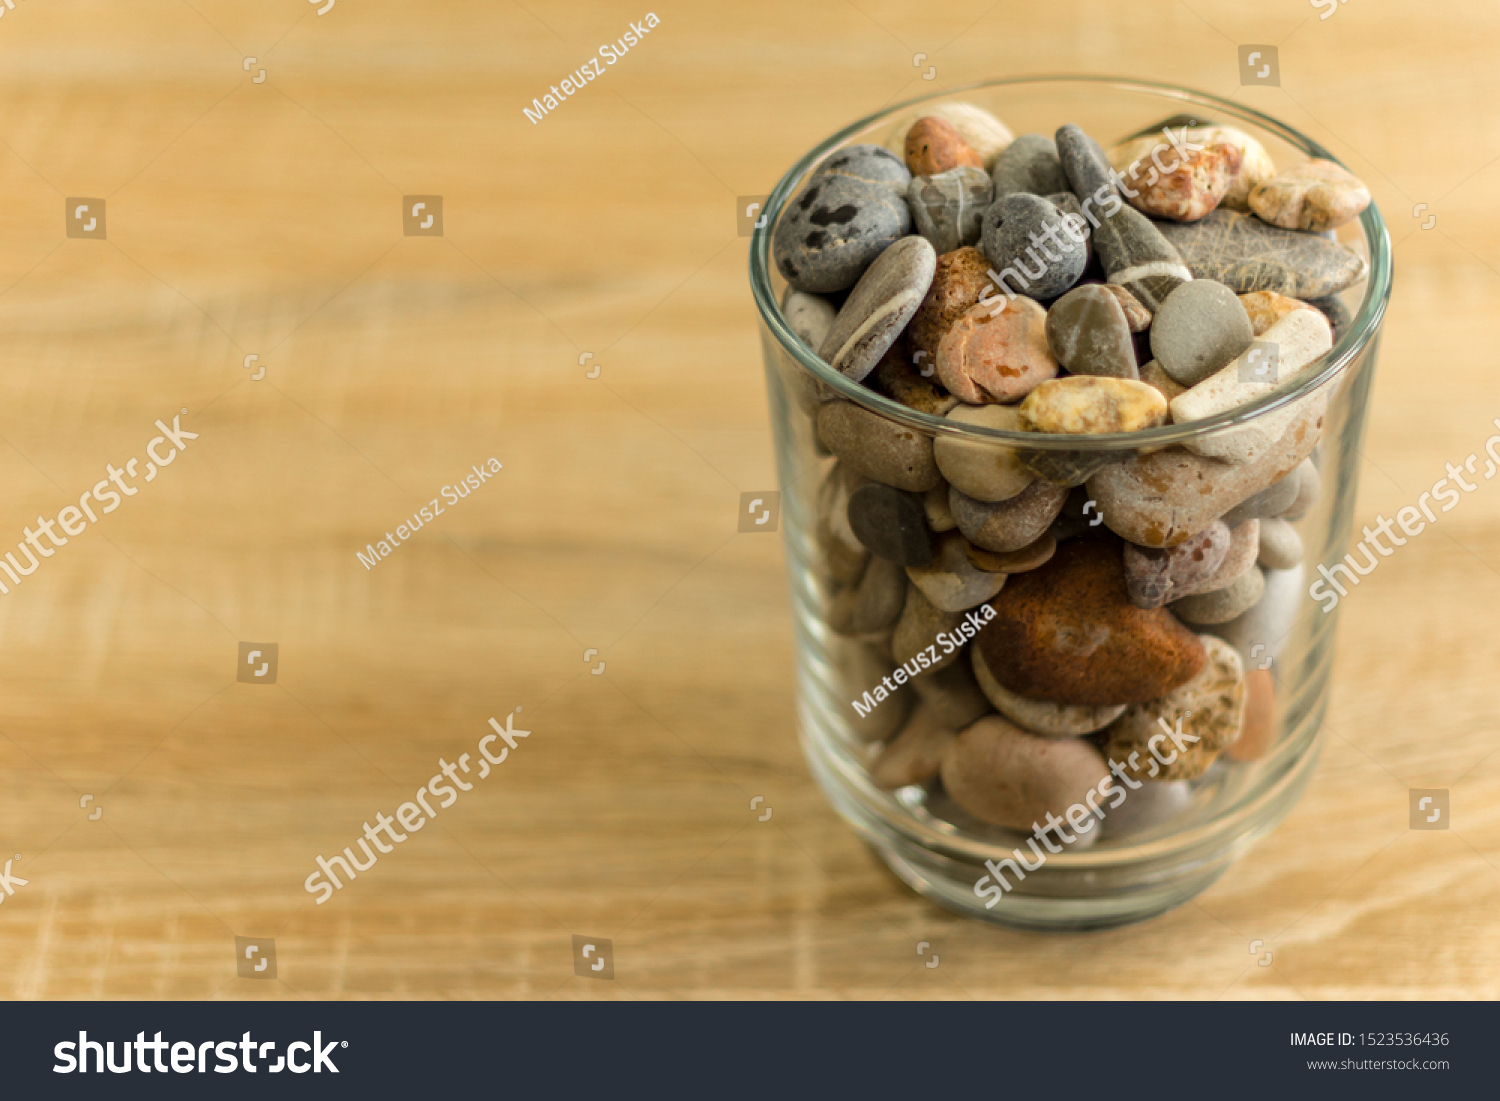 Small sea stones in a glass vessel. The idea of decorating the house with small rocks in a jar on a wooden blurred background. #1523536436